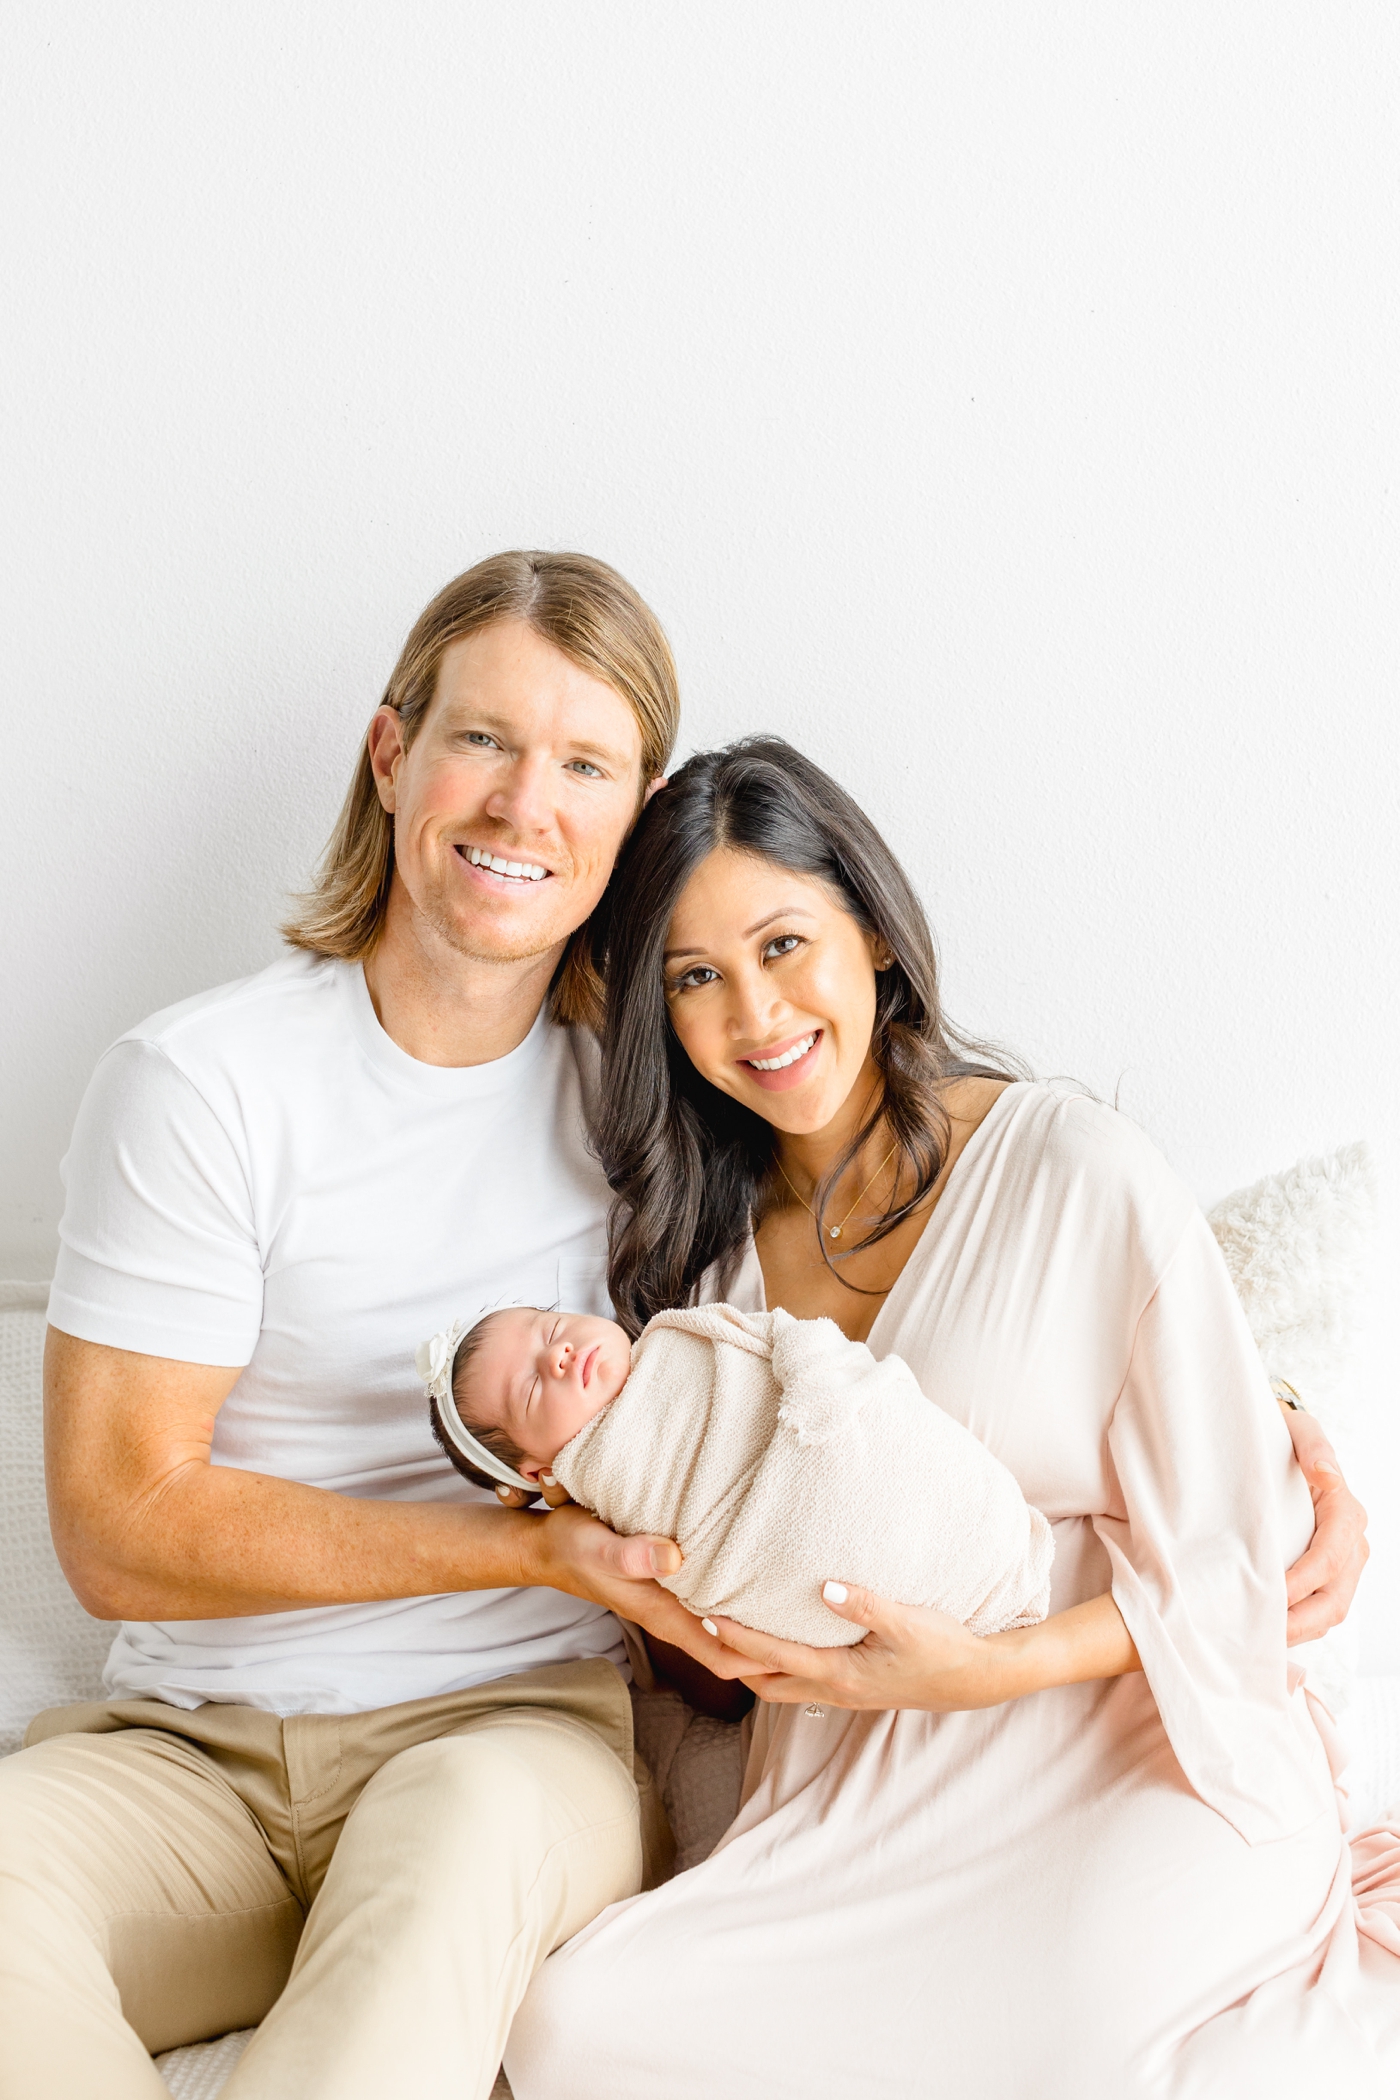 Parents smiling at camera while they hold newborn during studio session. Photo by Sana Ahmed Photography.